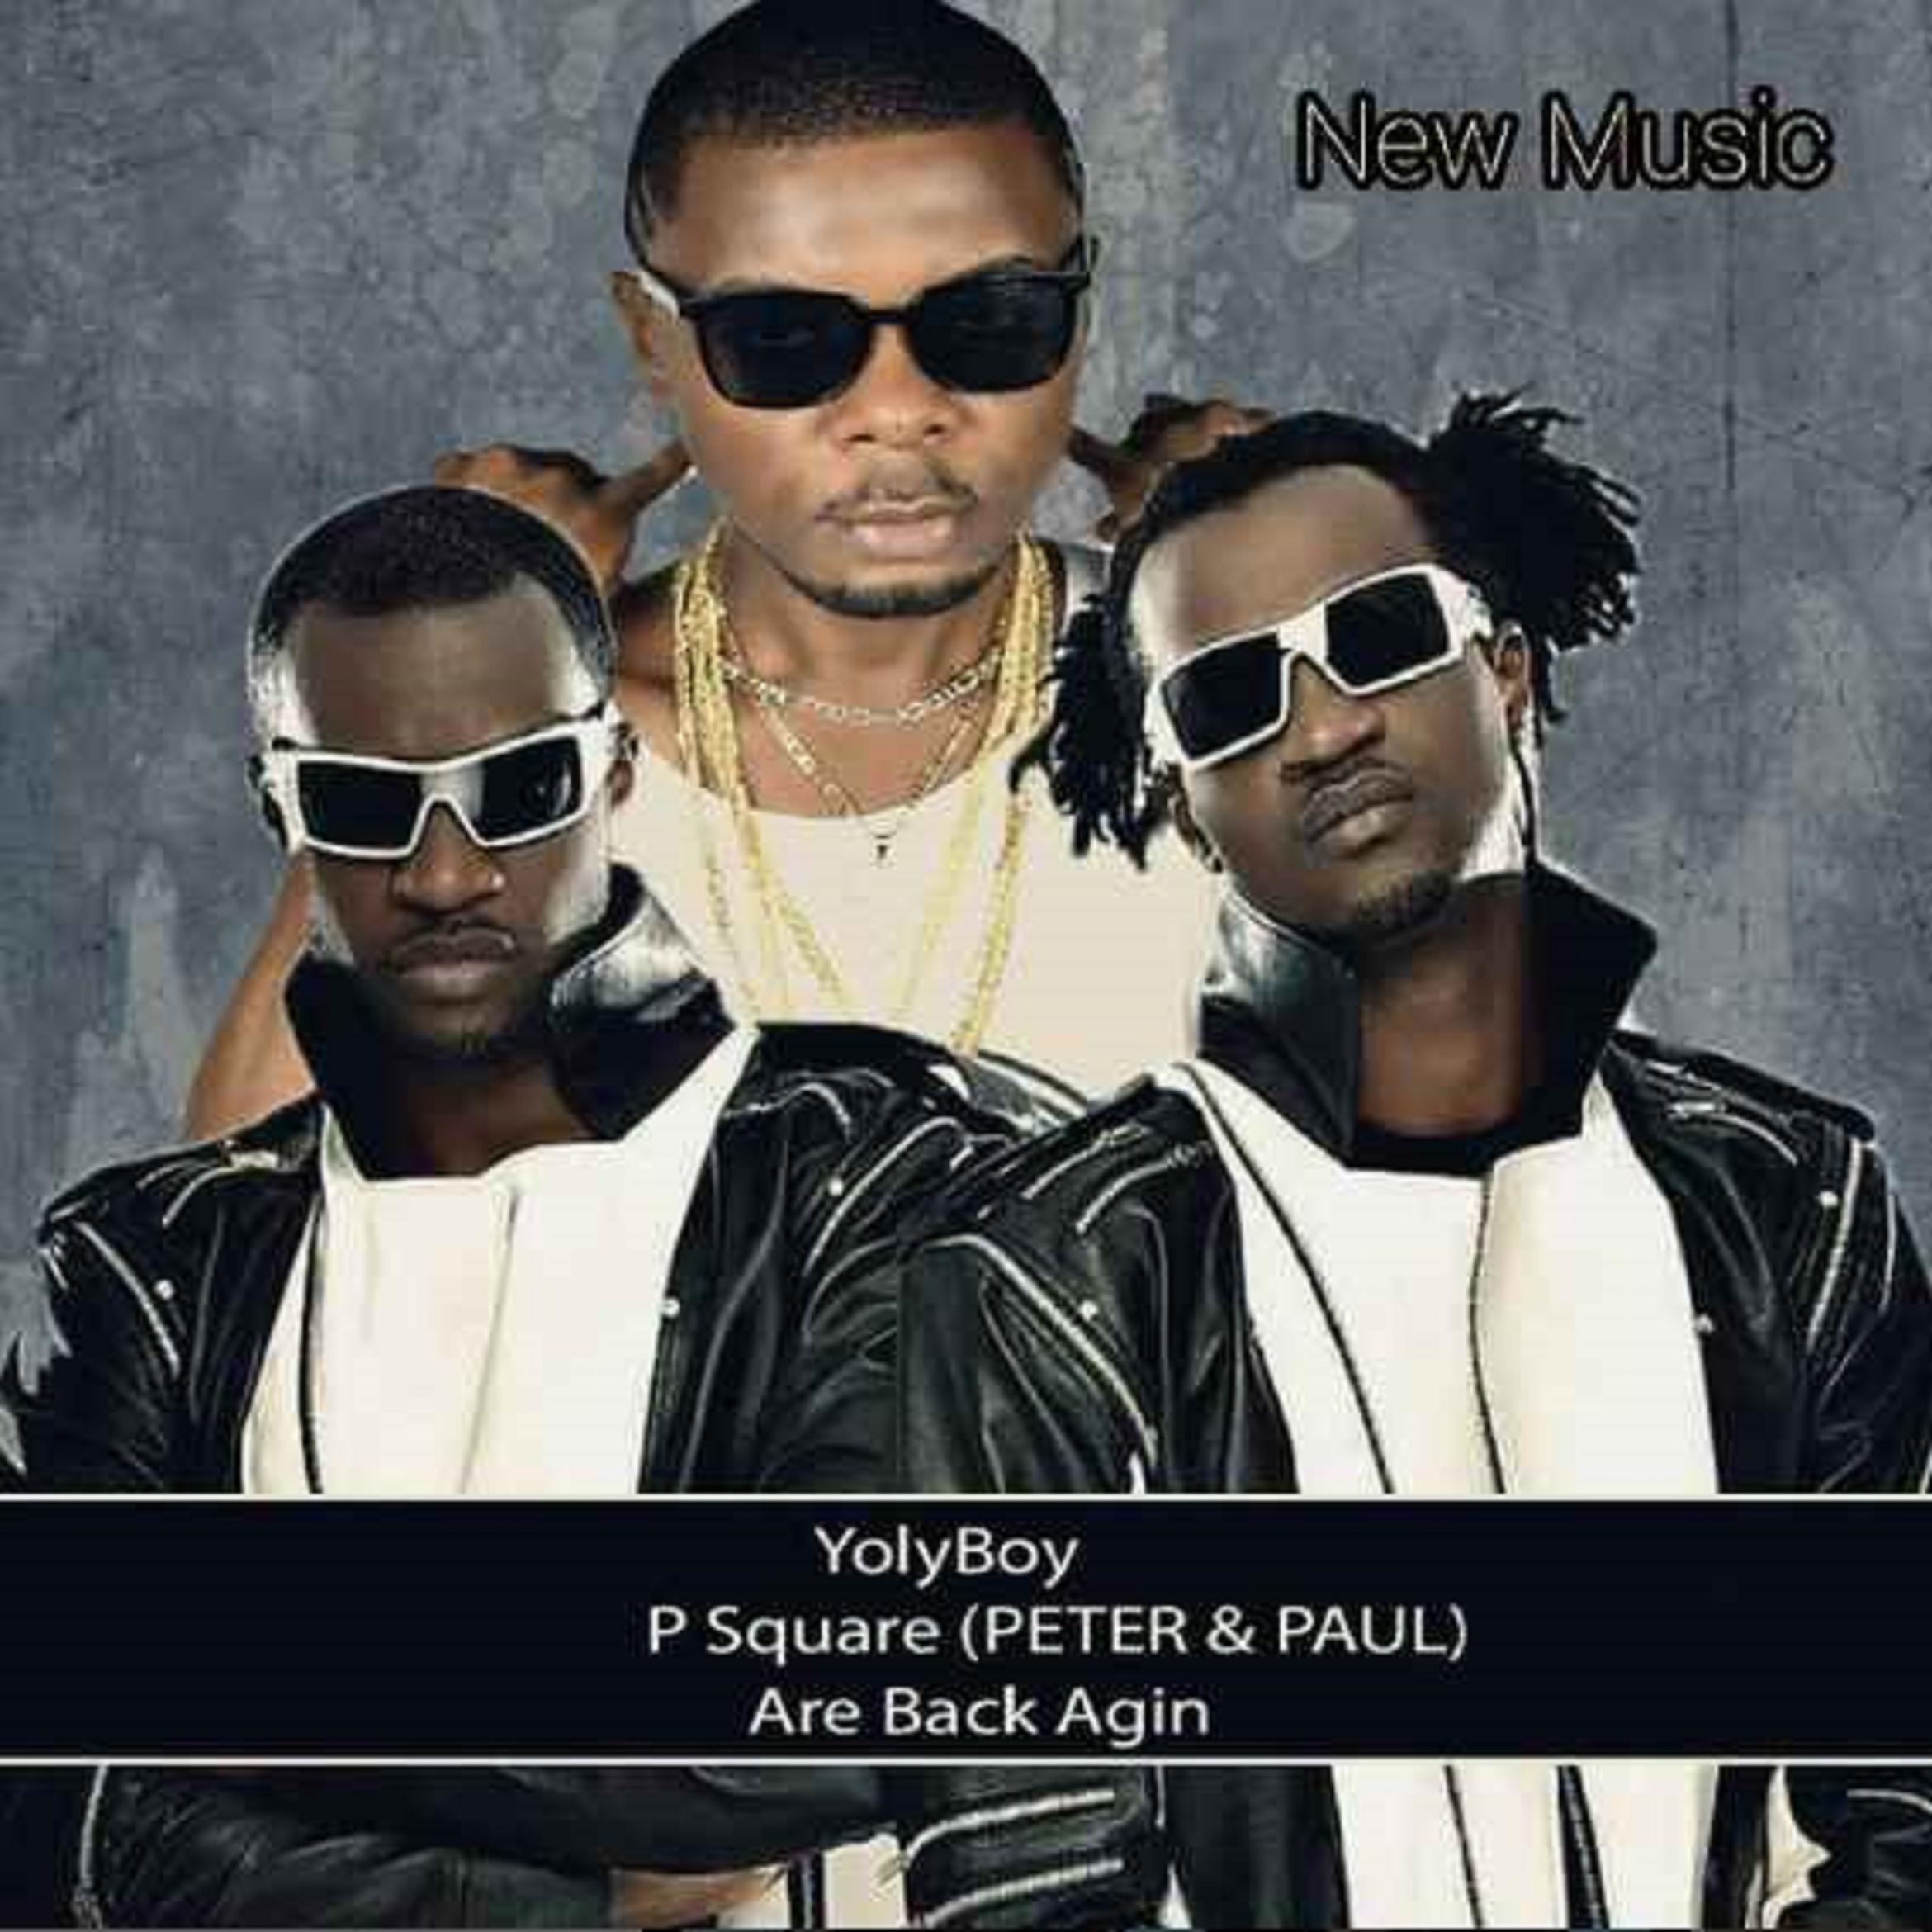 YolyBoy_P-Square-Mr-P_Rudeboy_P-Square_are_back_again-YolyBoy_P-Square-Mr-P_Rudeboy_P-Square_are_back_again-YolyBoy_P-Square-Mr-P_Rudeboy_P-Square_are_back_again-YolyBoy_P-Square-Mr-P_Rudeboy_P-Square_are_back_againYolyBoy_P-Square-Mr-P_Rudeboy_P-Square_are_back_again